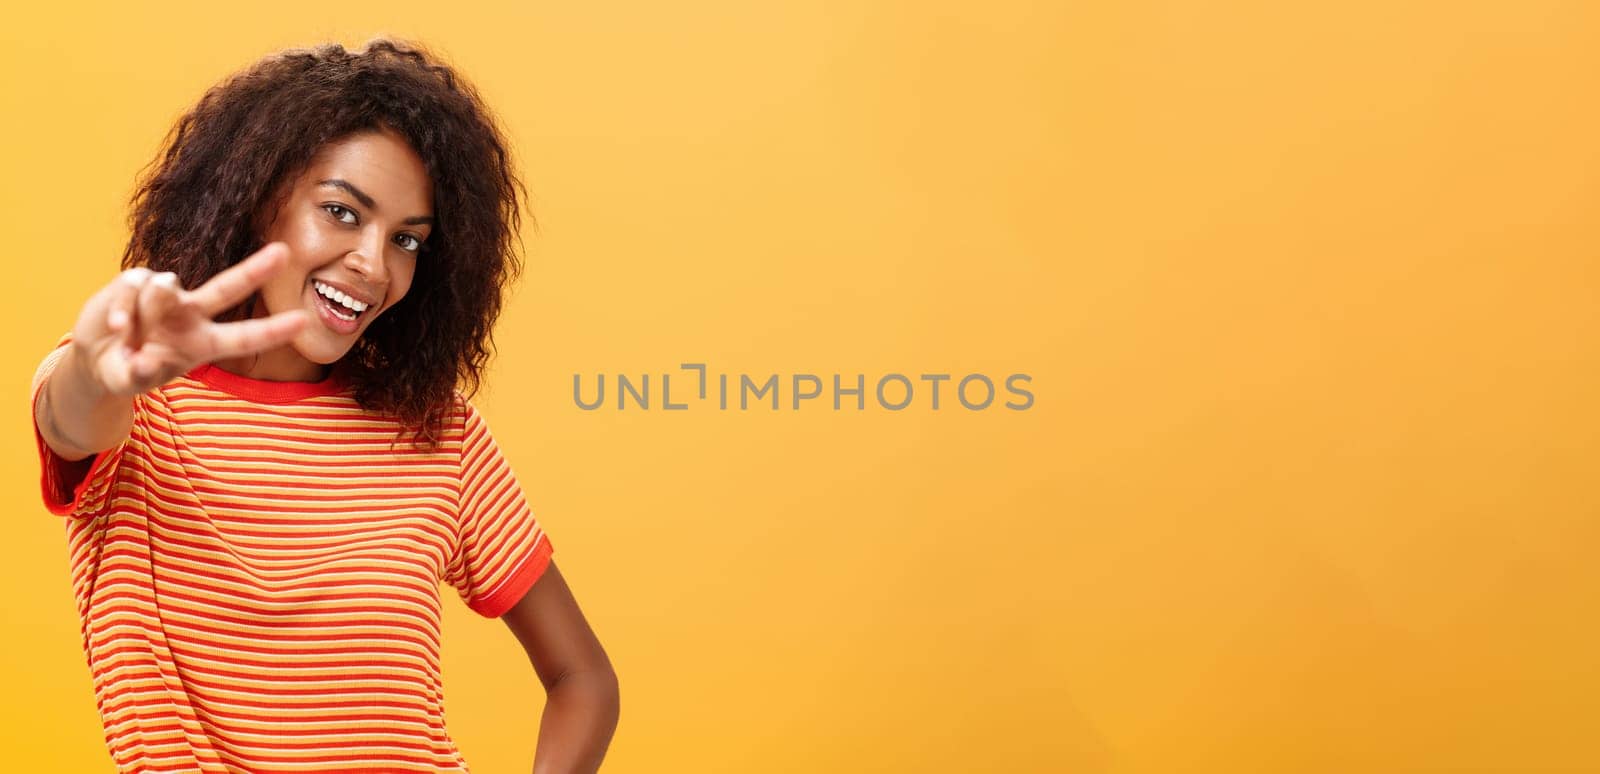 Hey peace my friend. Charming outgoing and confident carefree dark-skinned girl with afro hairstyle in trendy t-shirt pulling hand with victory gesture towards camera smiling over orange wall.